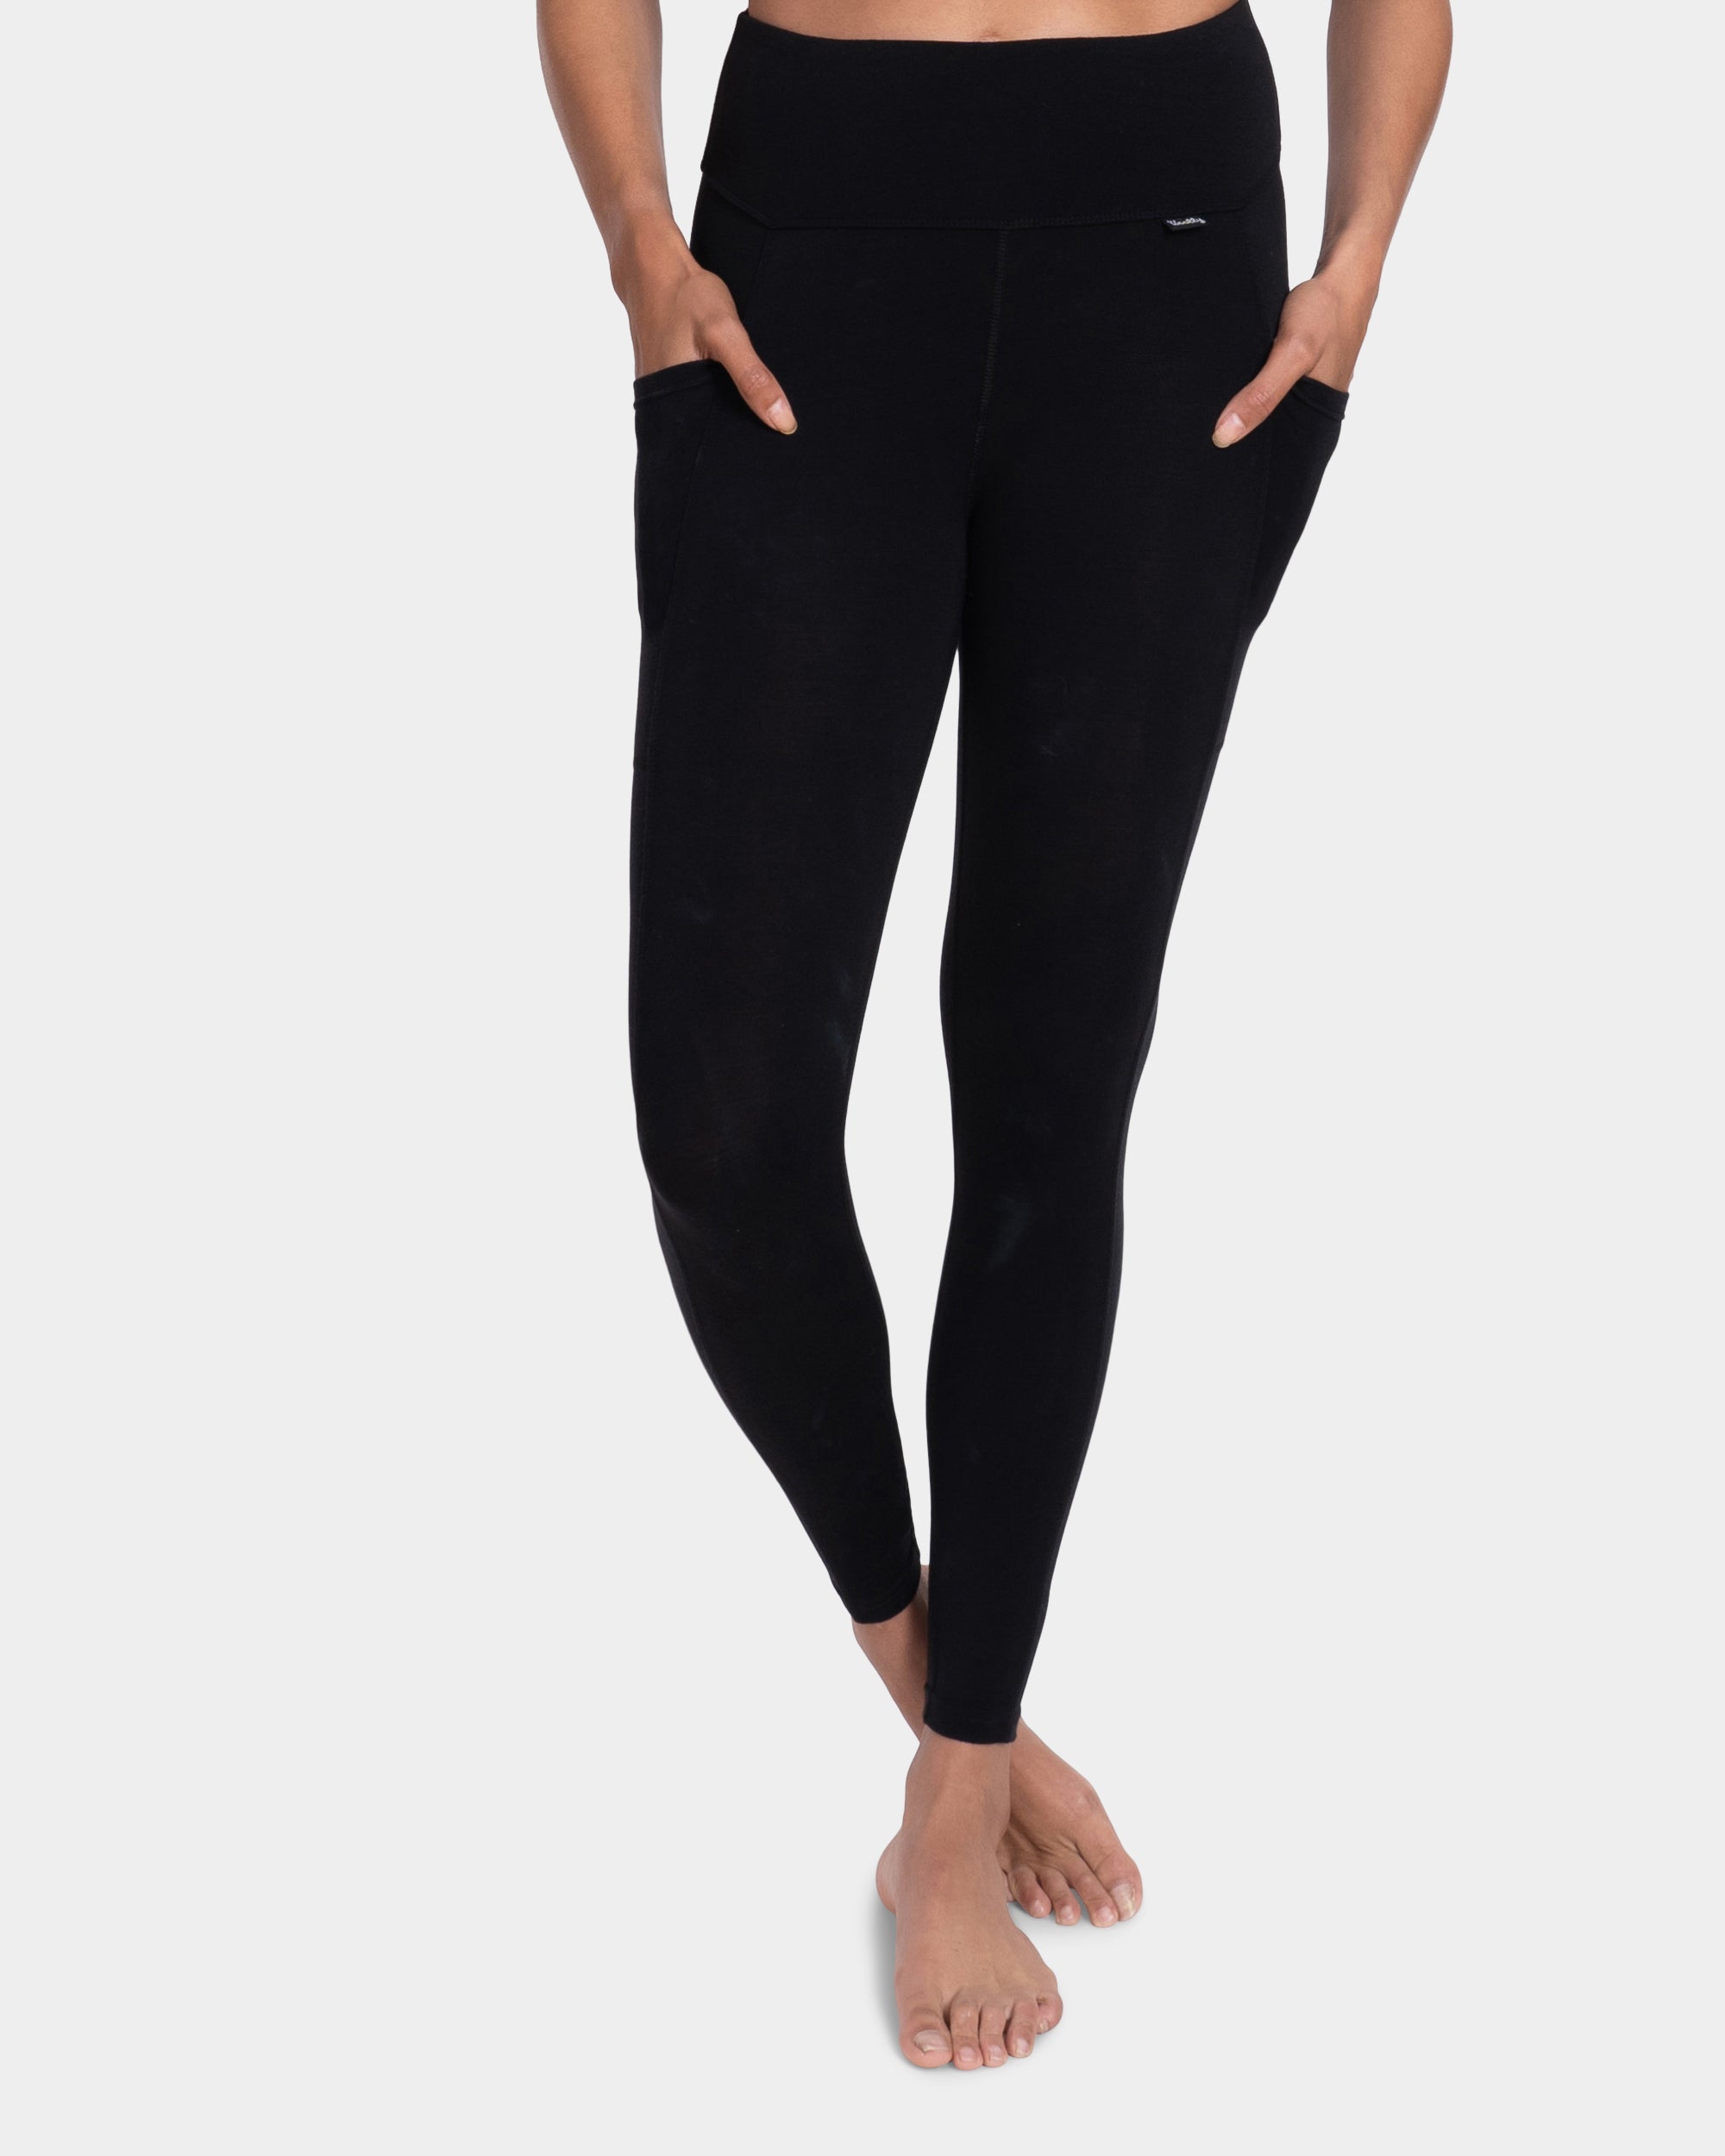 Women leggings with pockets! Exclusive design! Size: Small, Color: Black